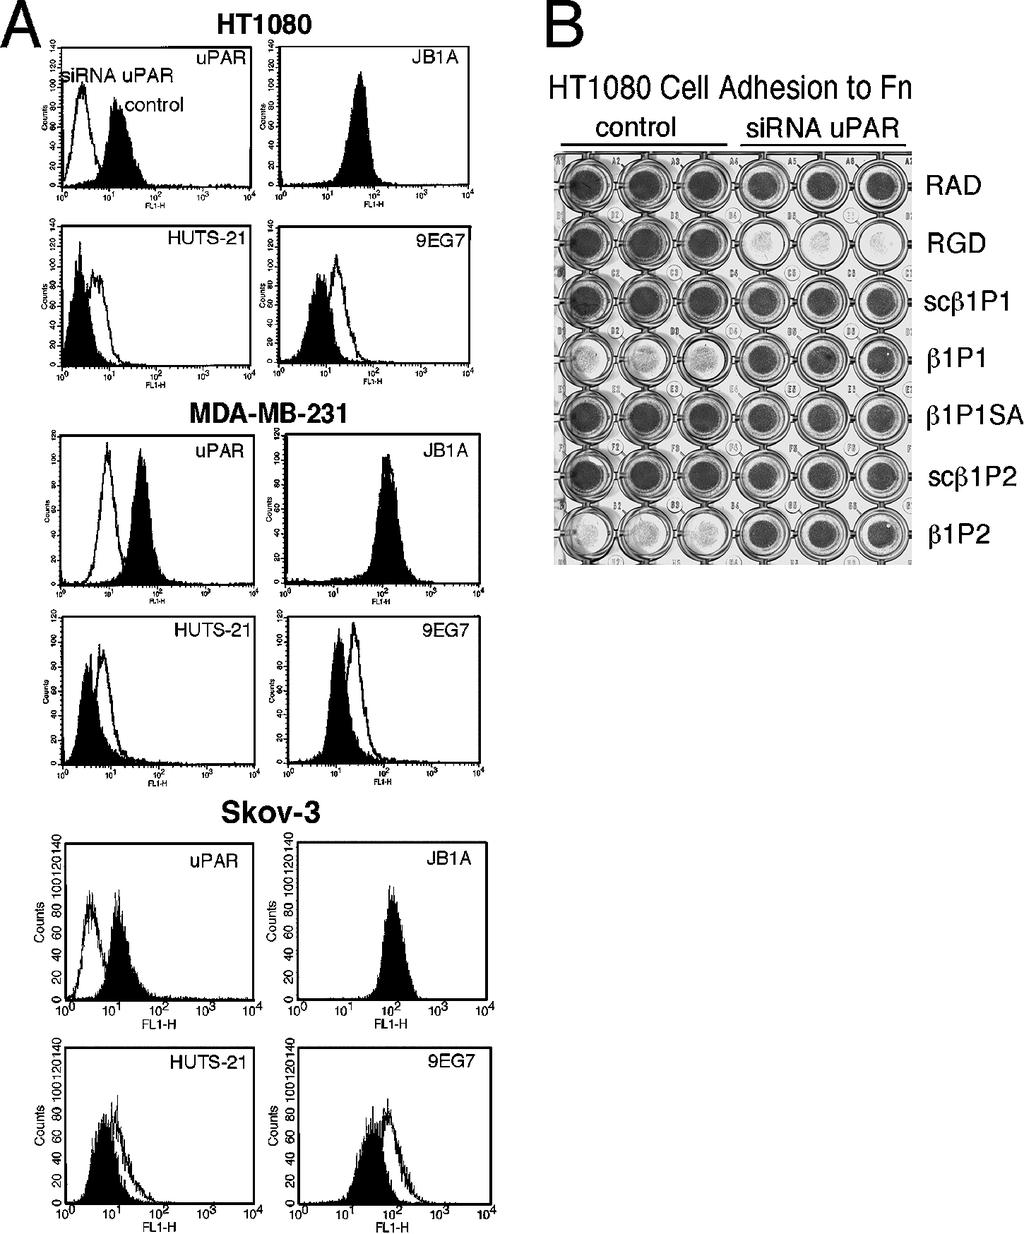 Figure 5. Suppression of upar expression induces LIBS epitope and changes 5 1-mediated Fn binding in tumor cells.